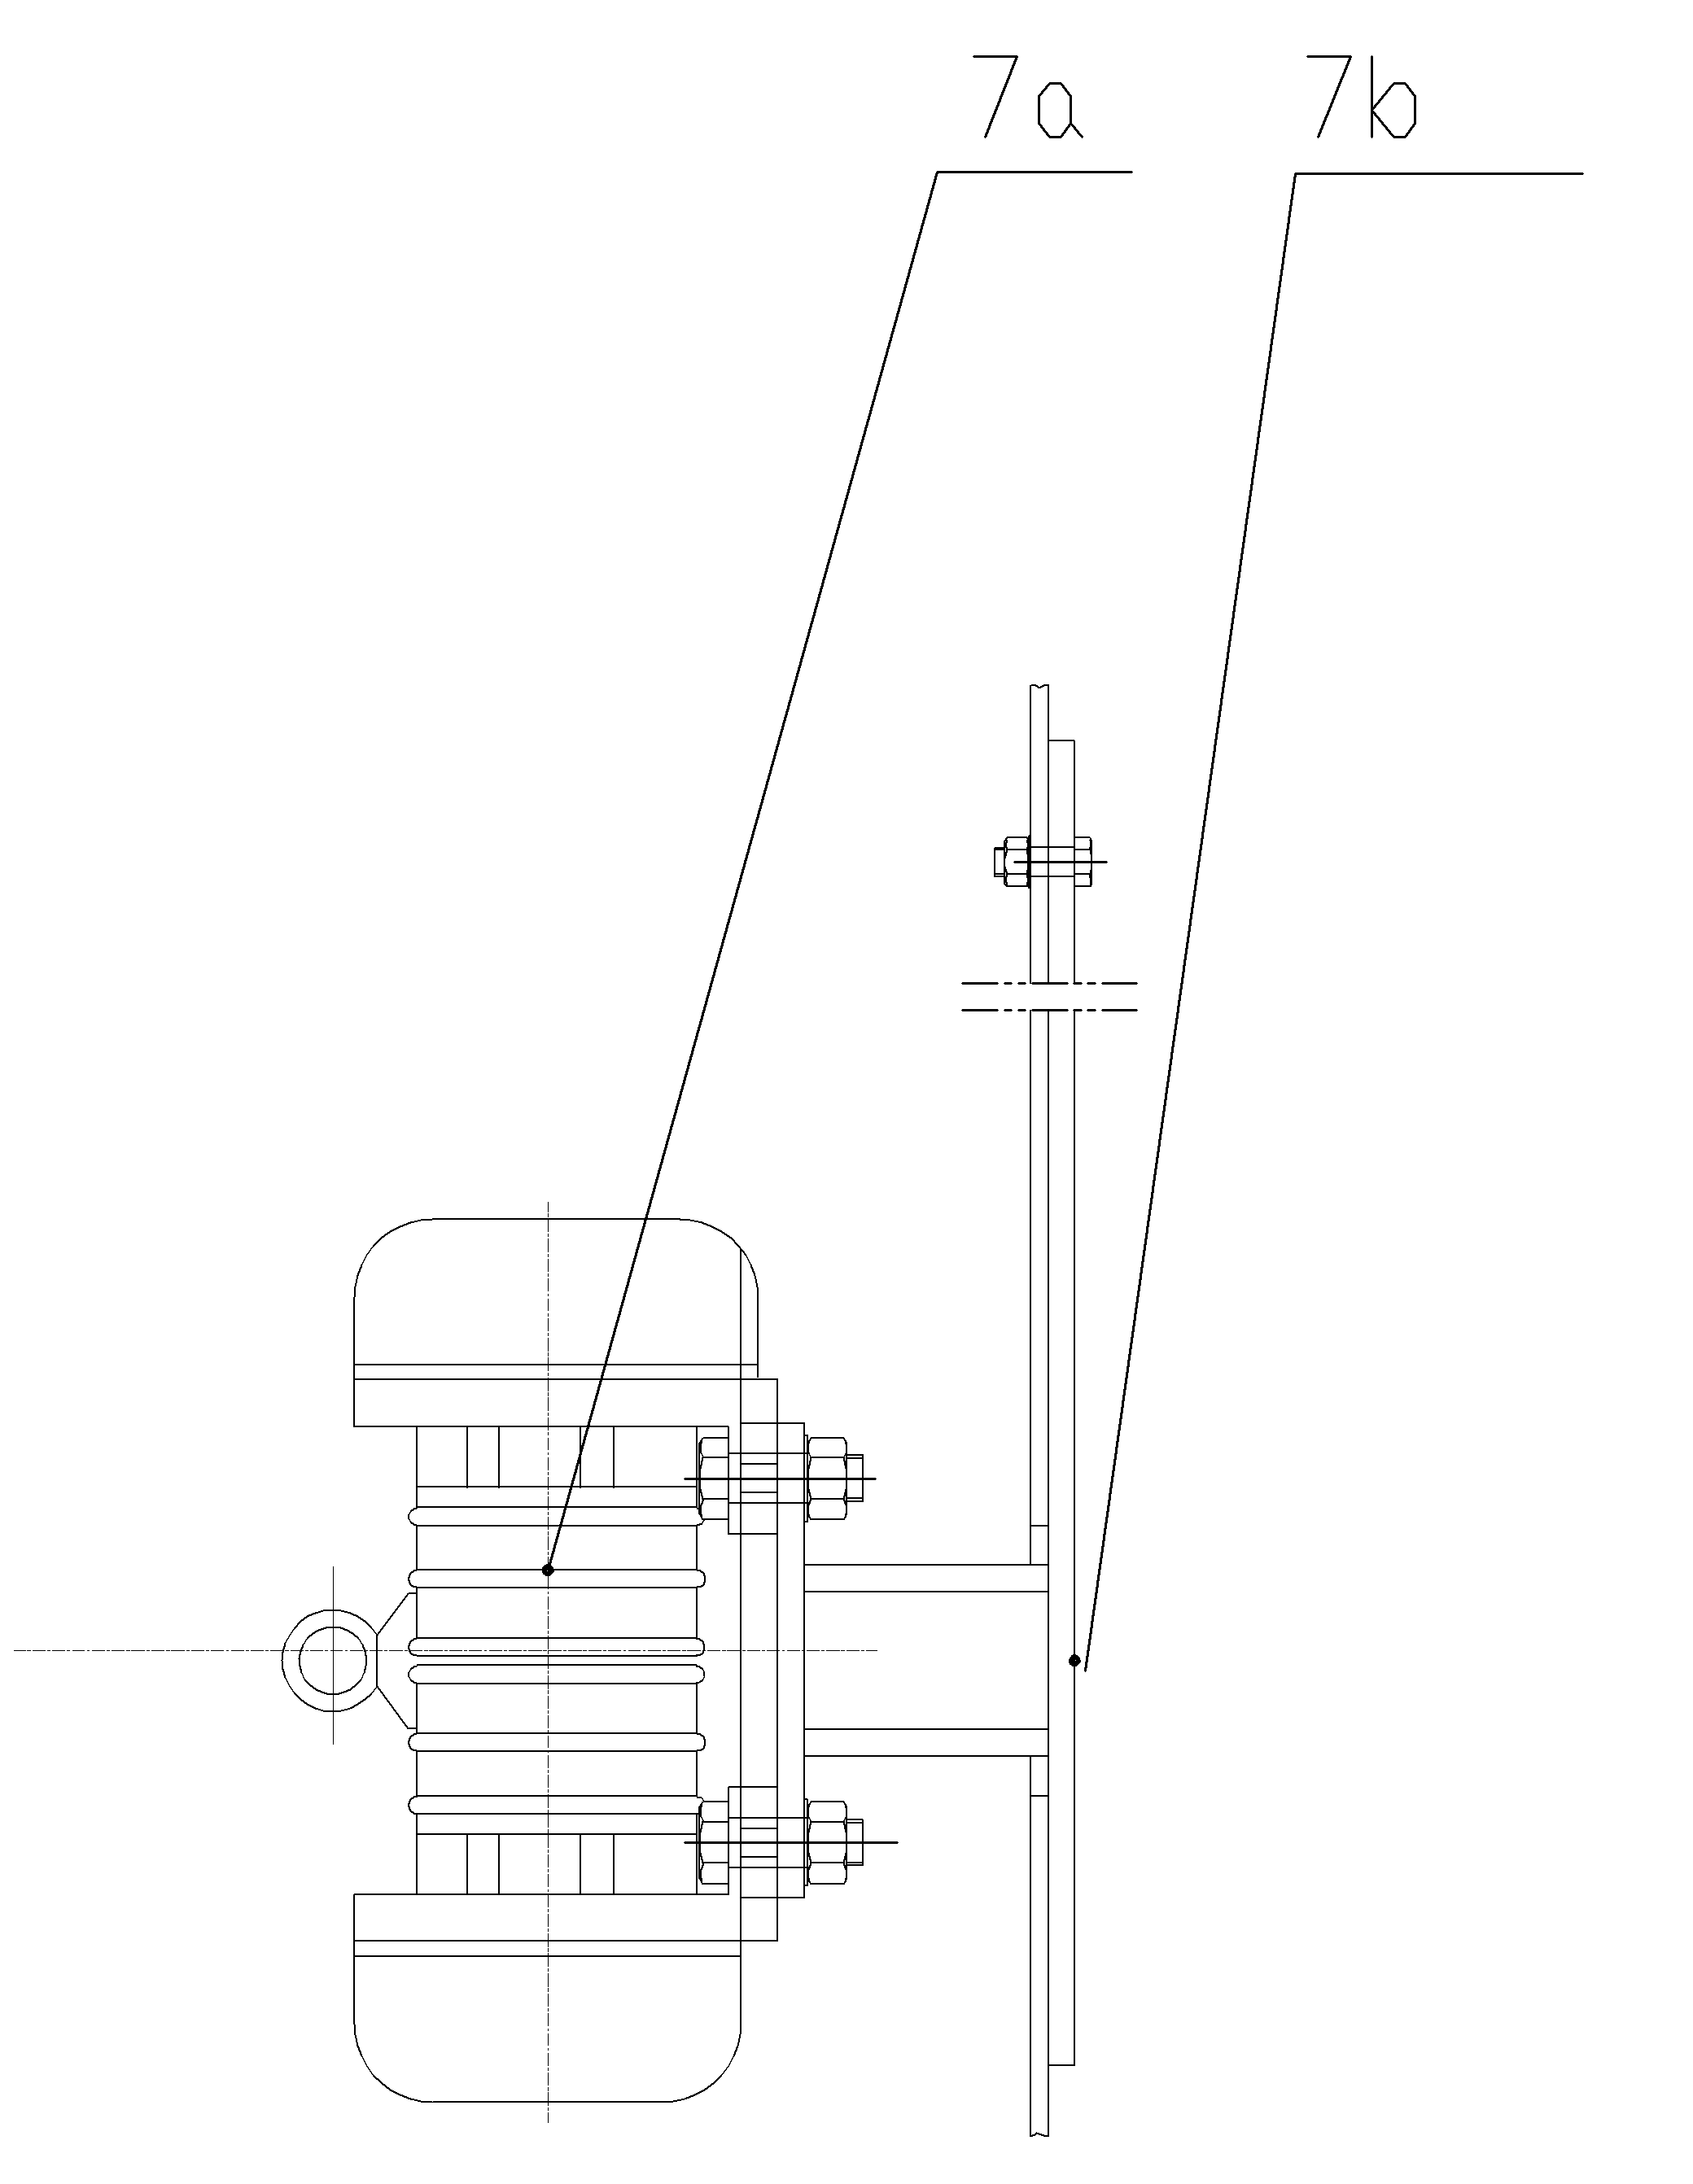 Self-weighing hopper of loading and unloading device